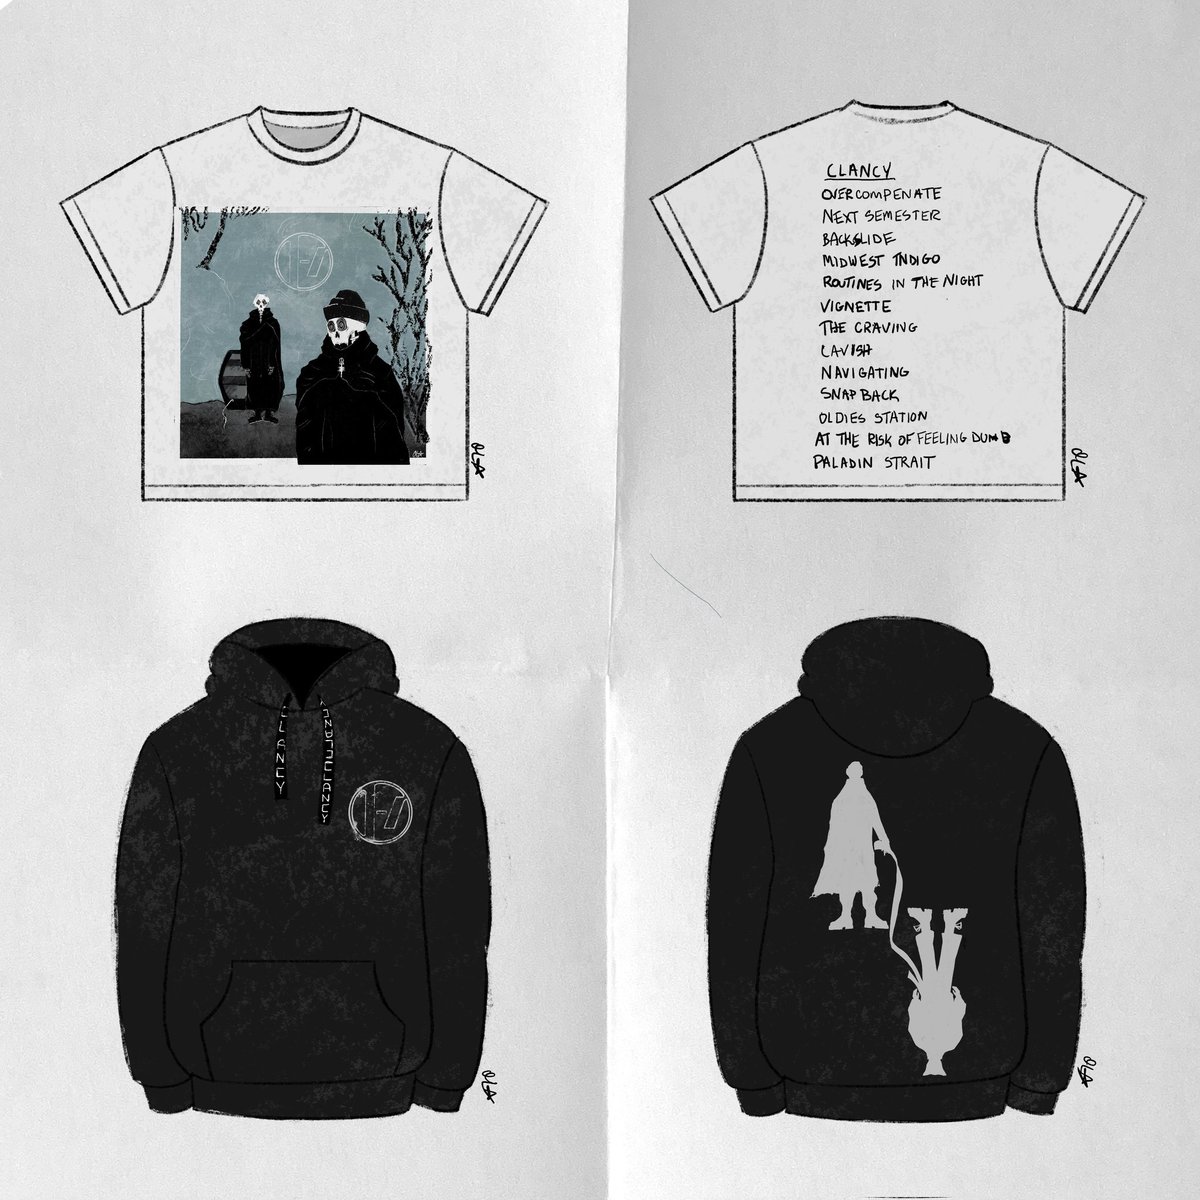 I made these merch designs for fun, feel free to use these ideas in the future merch!! (and pay me) [@twentyonepilots @tylerrjoseph #cliqueart #twentyonepilots]